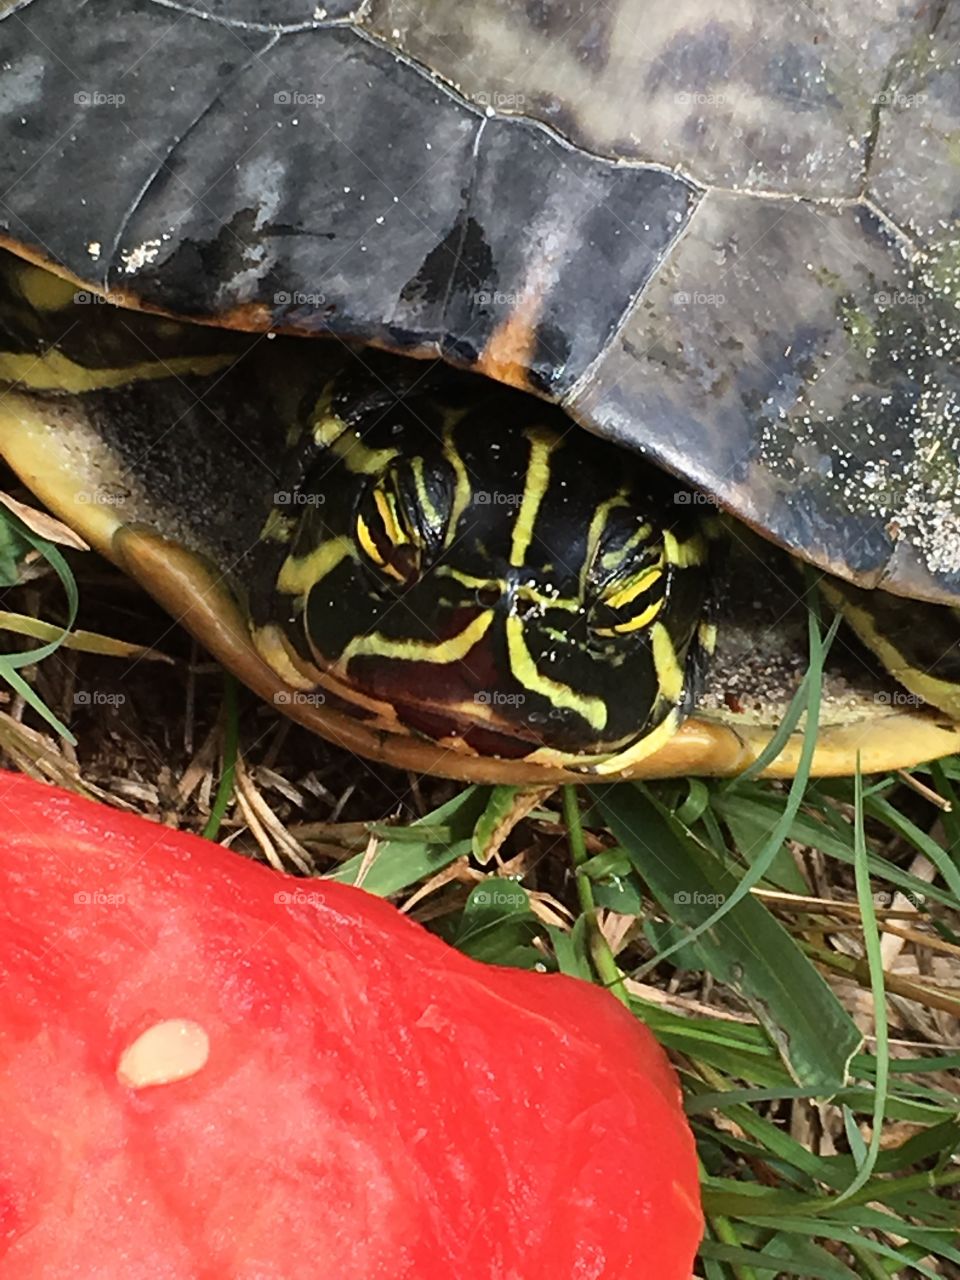 Turtle eating watermelon 🍉 in Florida 🐢